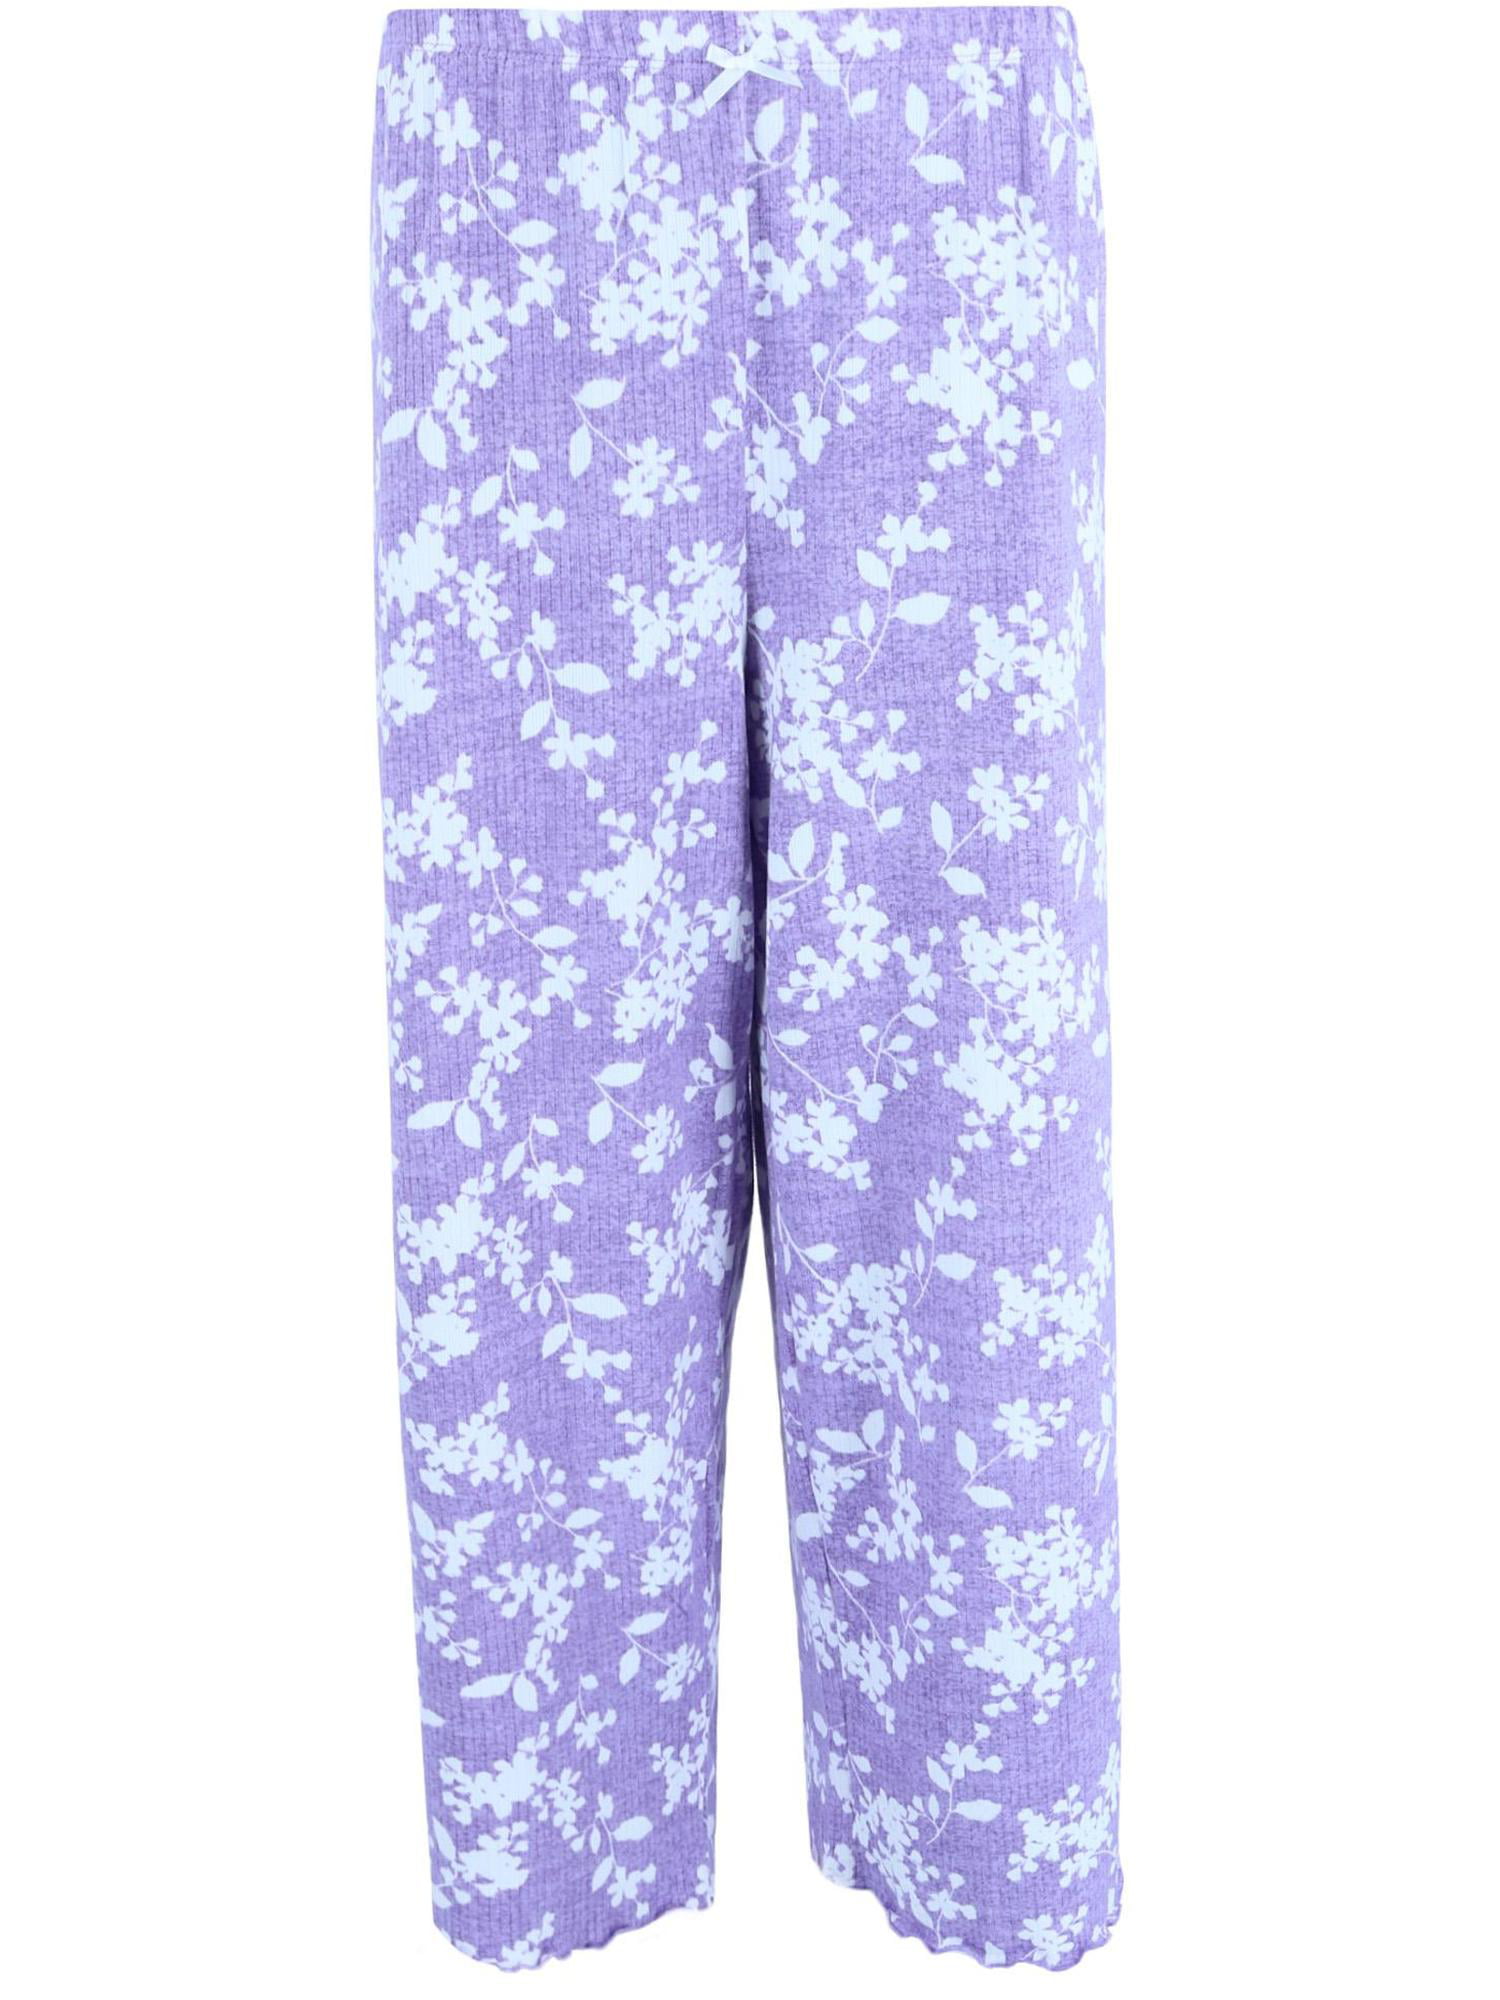 Women's Extra Tall Pajama Pants Extra Long Pj Pants Lilac Pjs Stitch-look  Vertical Chevron Design Dotted Lines -  Canada